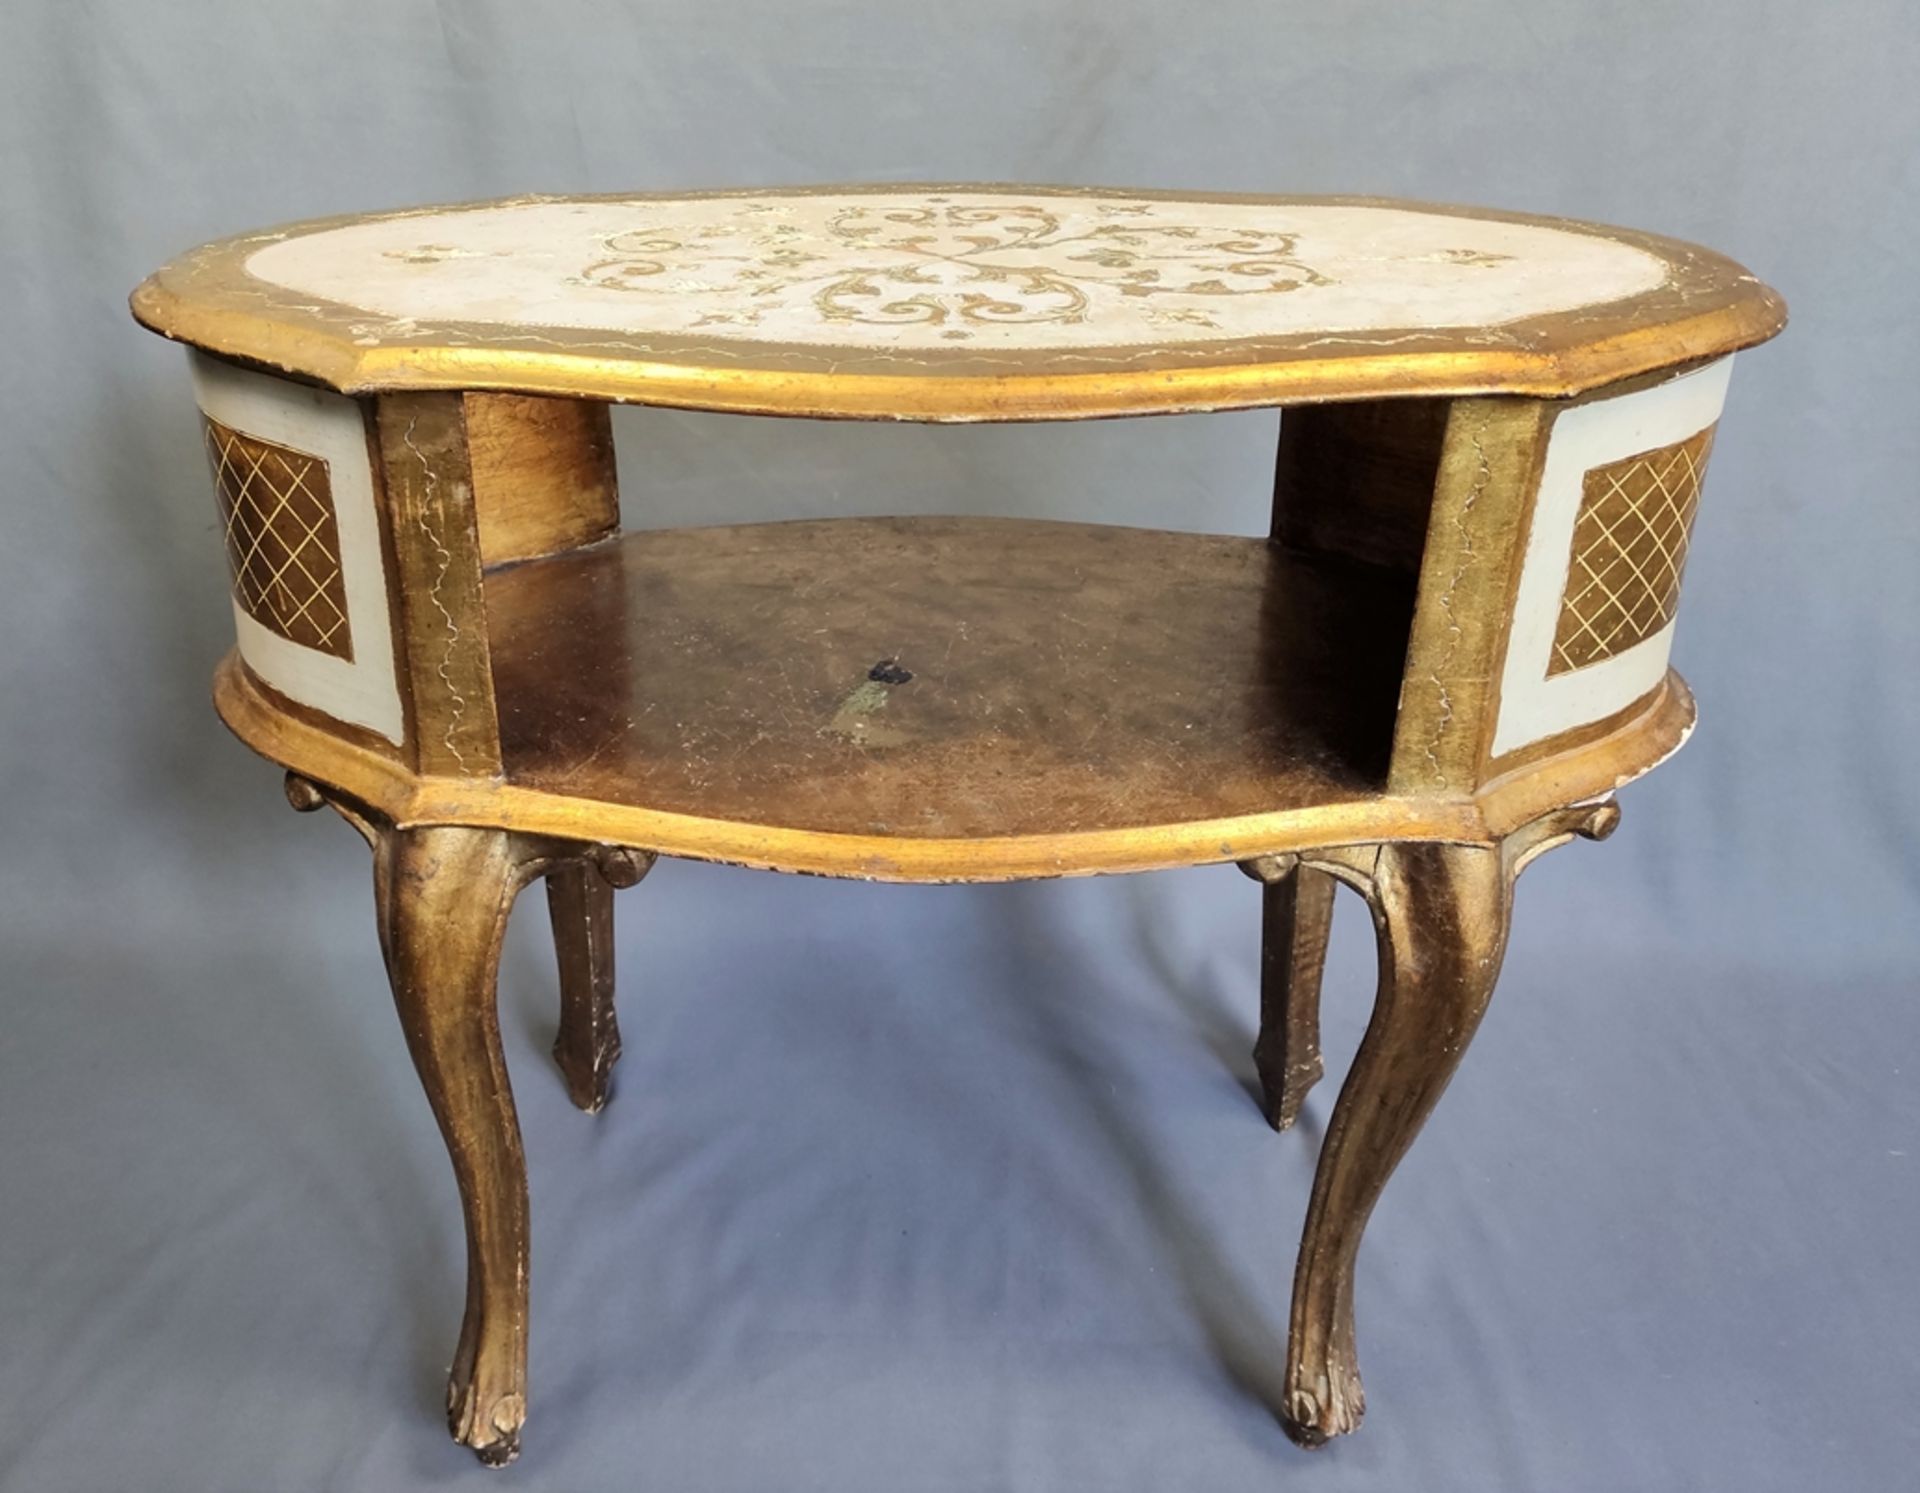 Small telephone table in baroque style on four curved legs, elongated, curved form with lower shelf